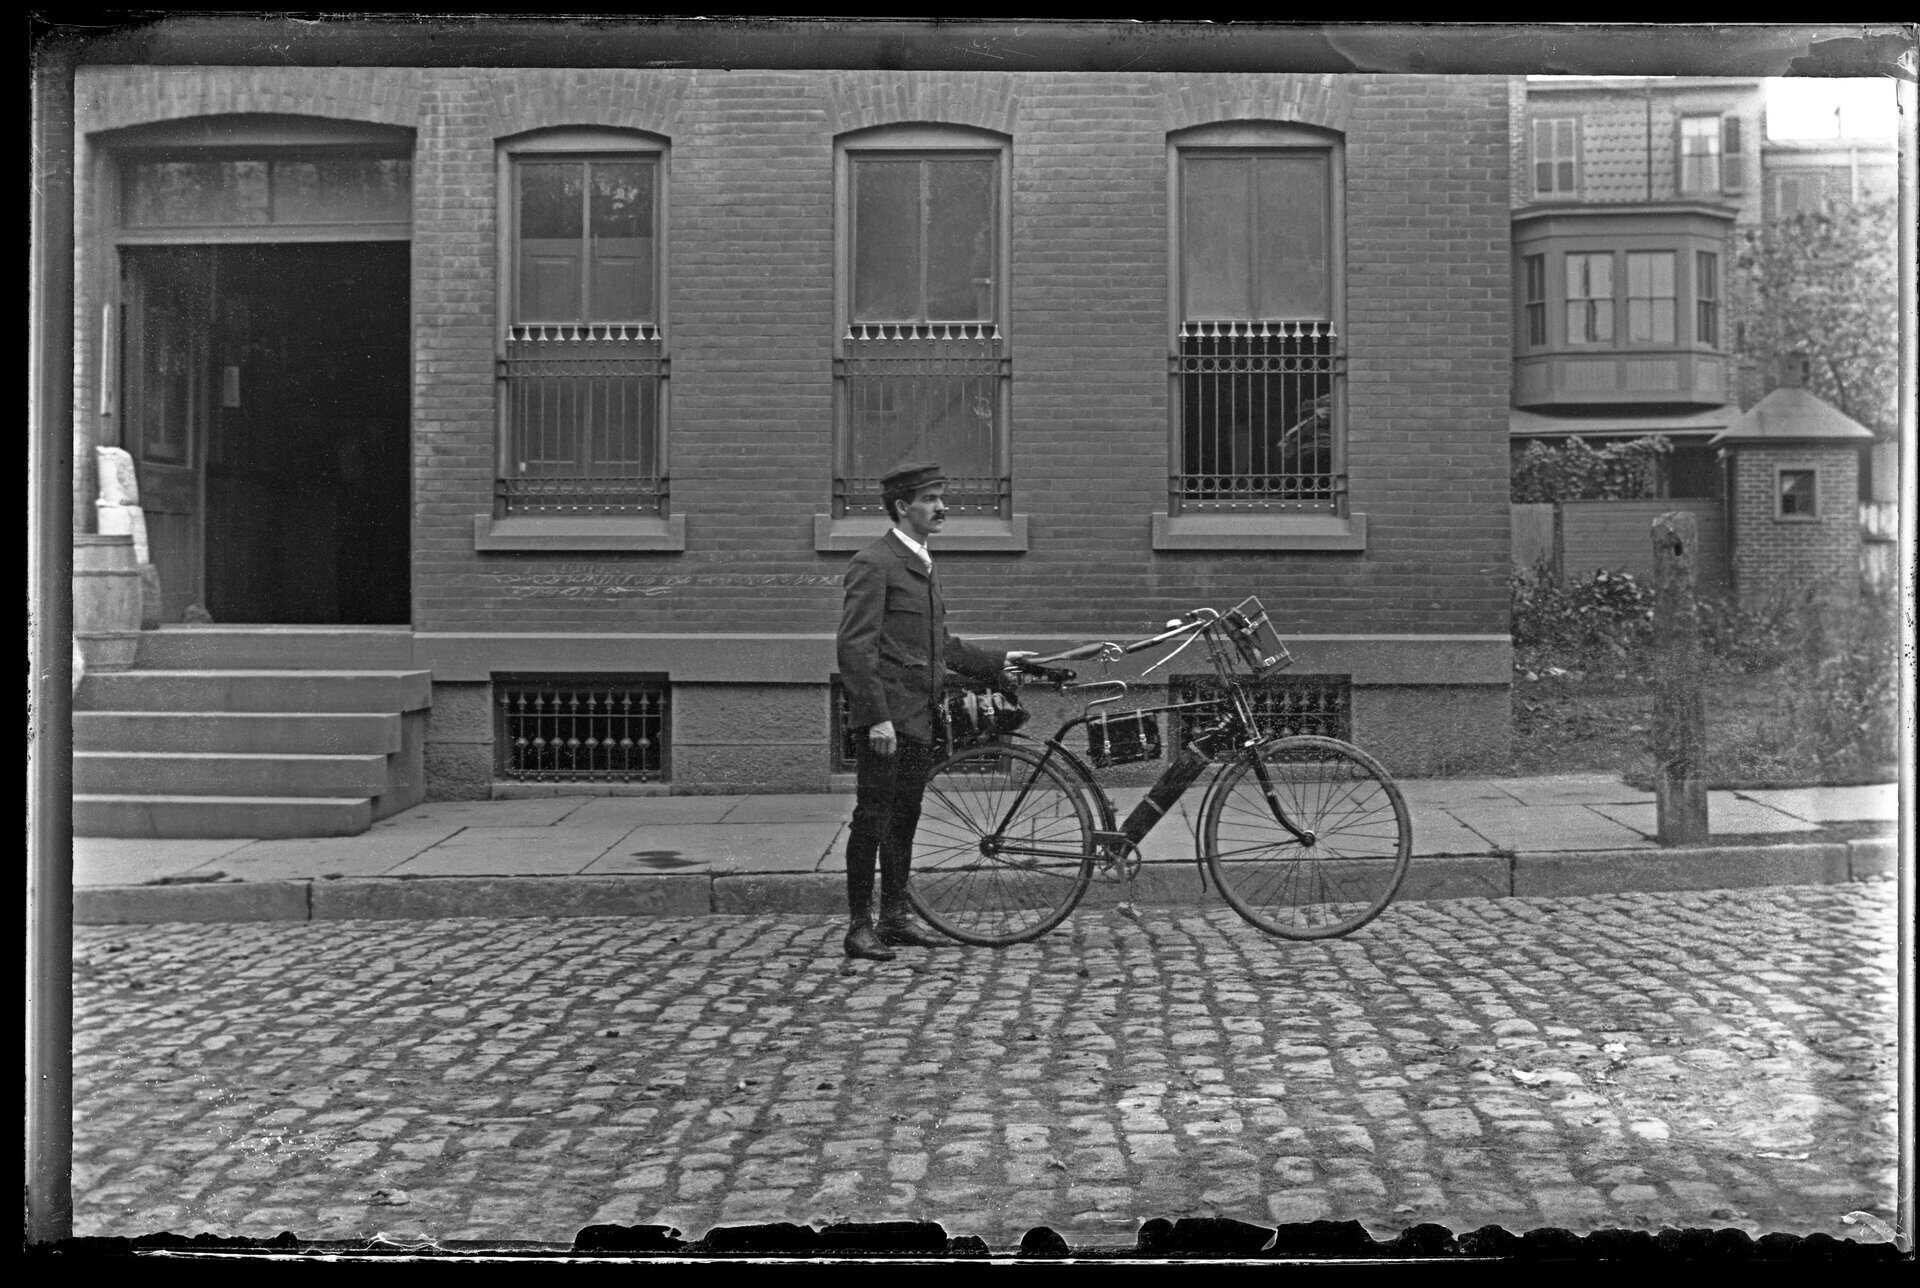 Grant Castner with safety bicycle, Trenton, New Jersey, 1894 Digital print from 4.25” x 6.5” glass plate negative